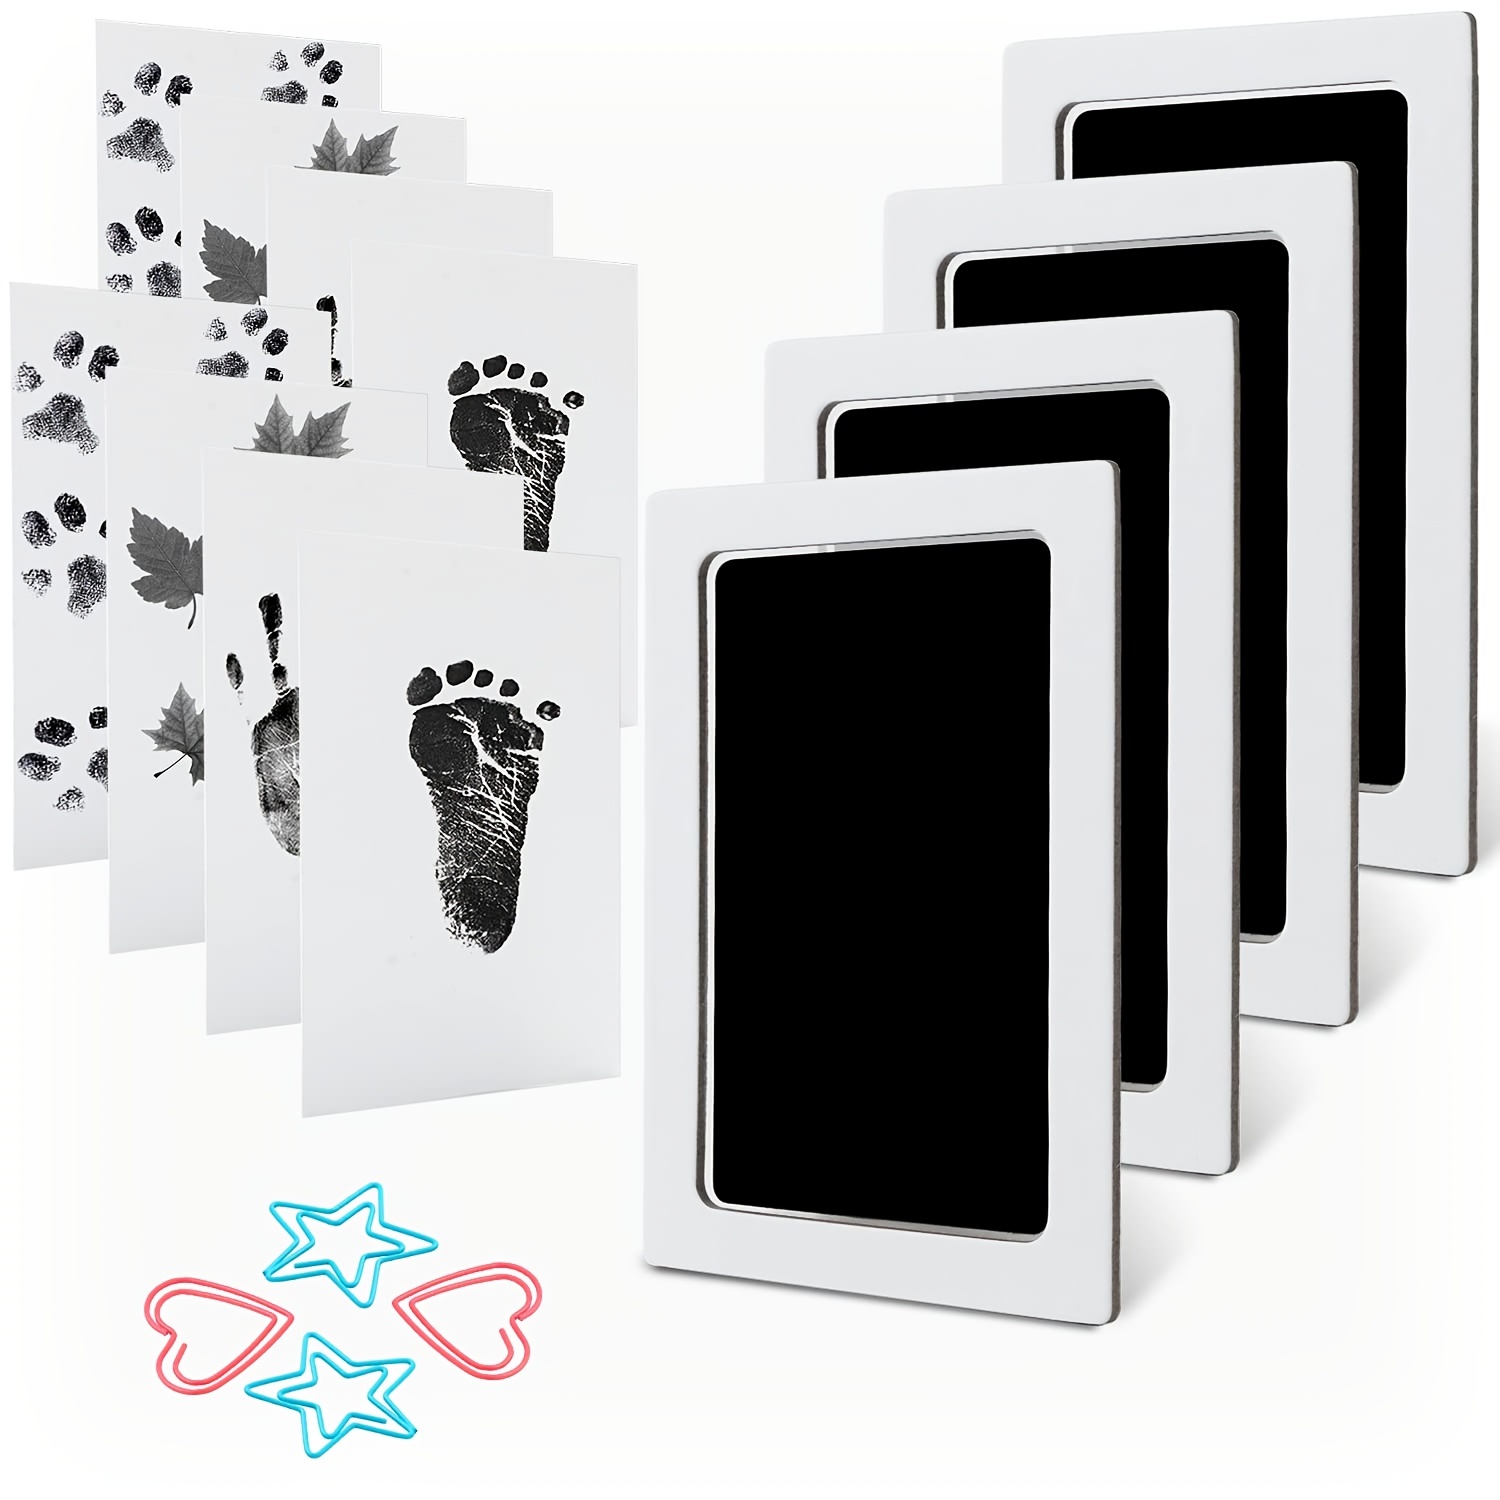 3pcs Baby Footprint Kit With Ink Pads And Imprint Cards